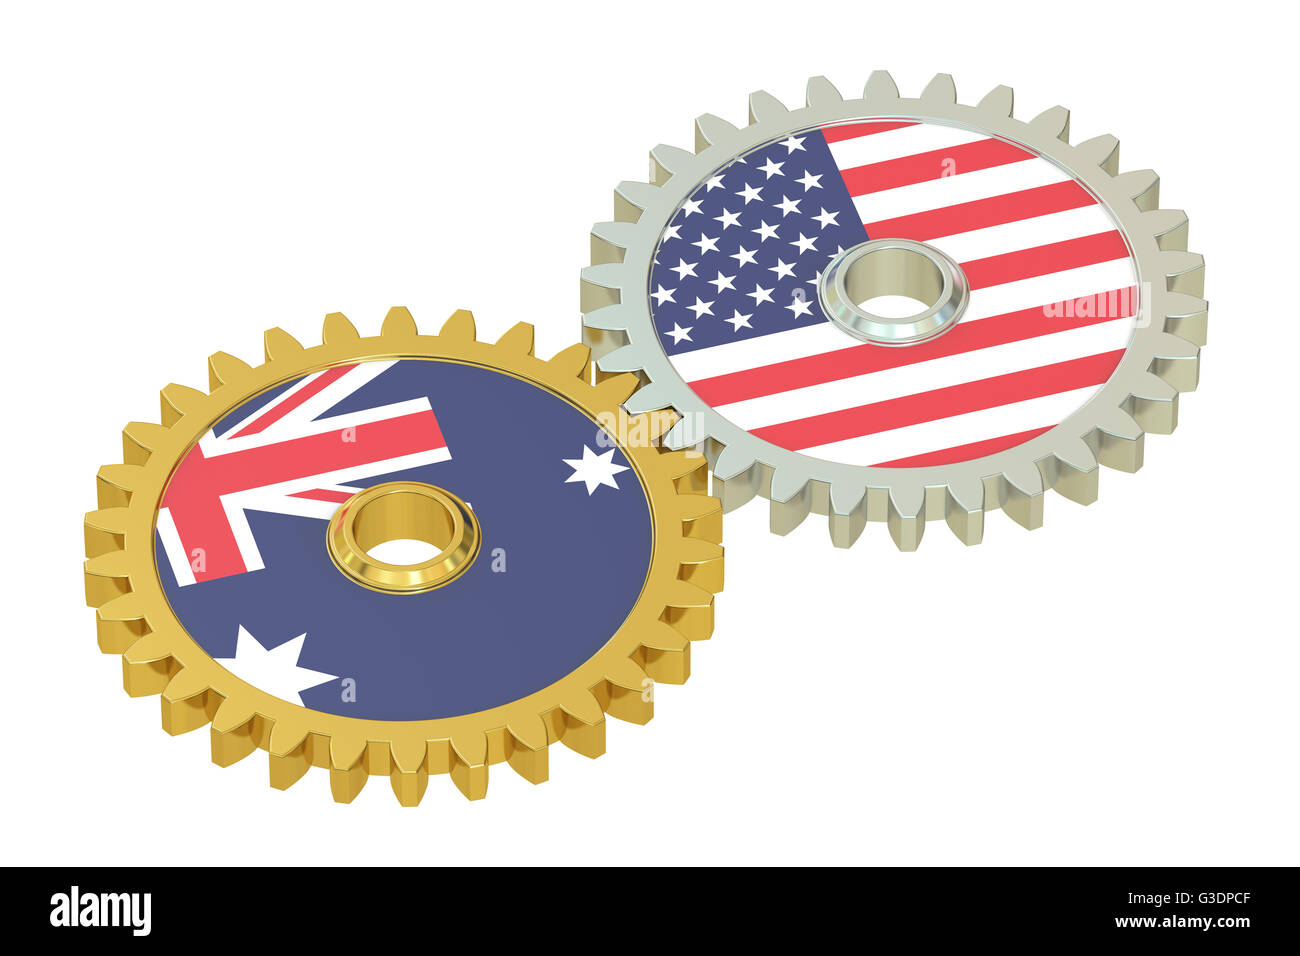 USA and Australia flags on a gears, 3D rendering isolated on white background Stock Photo